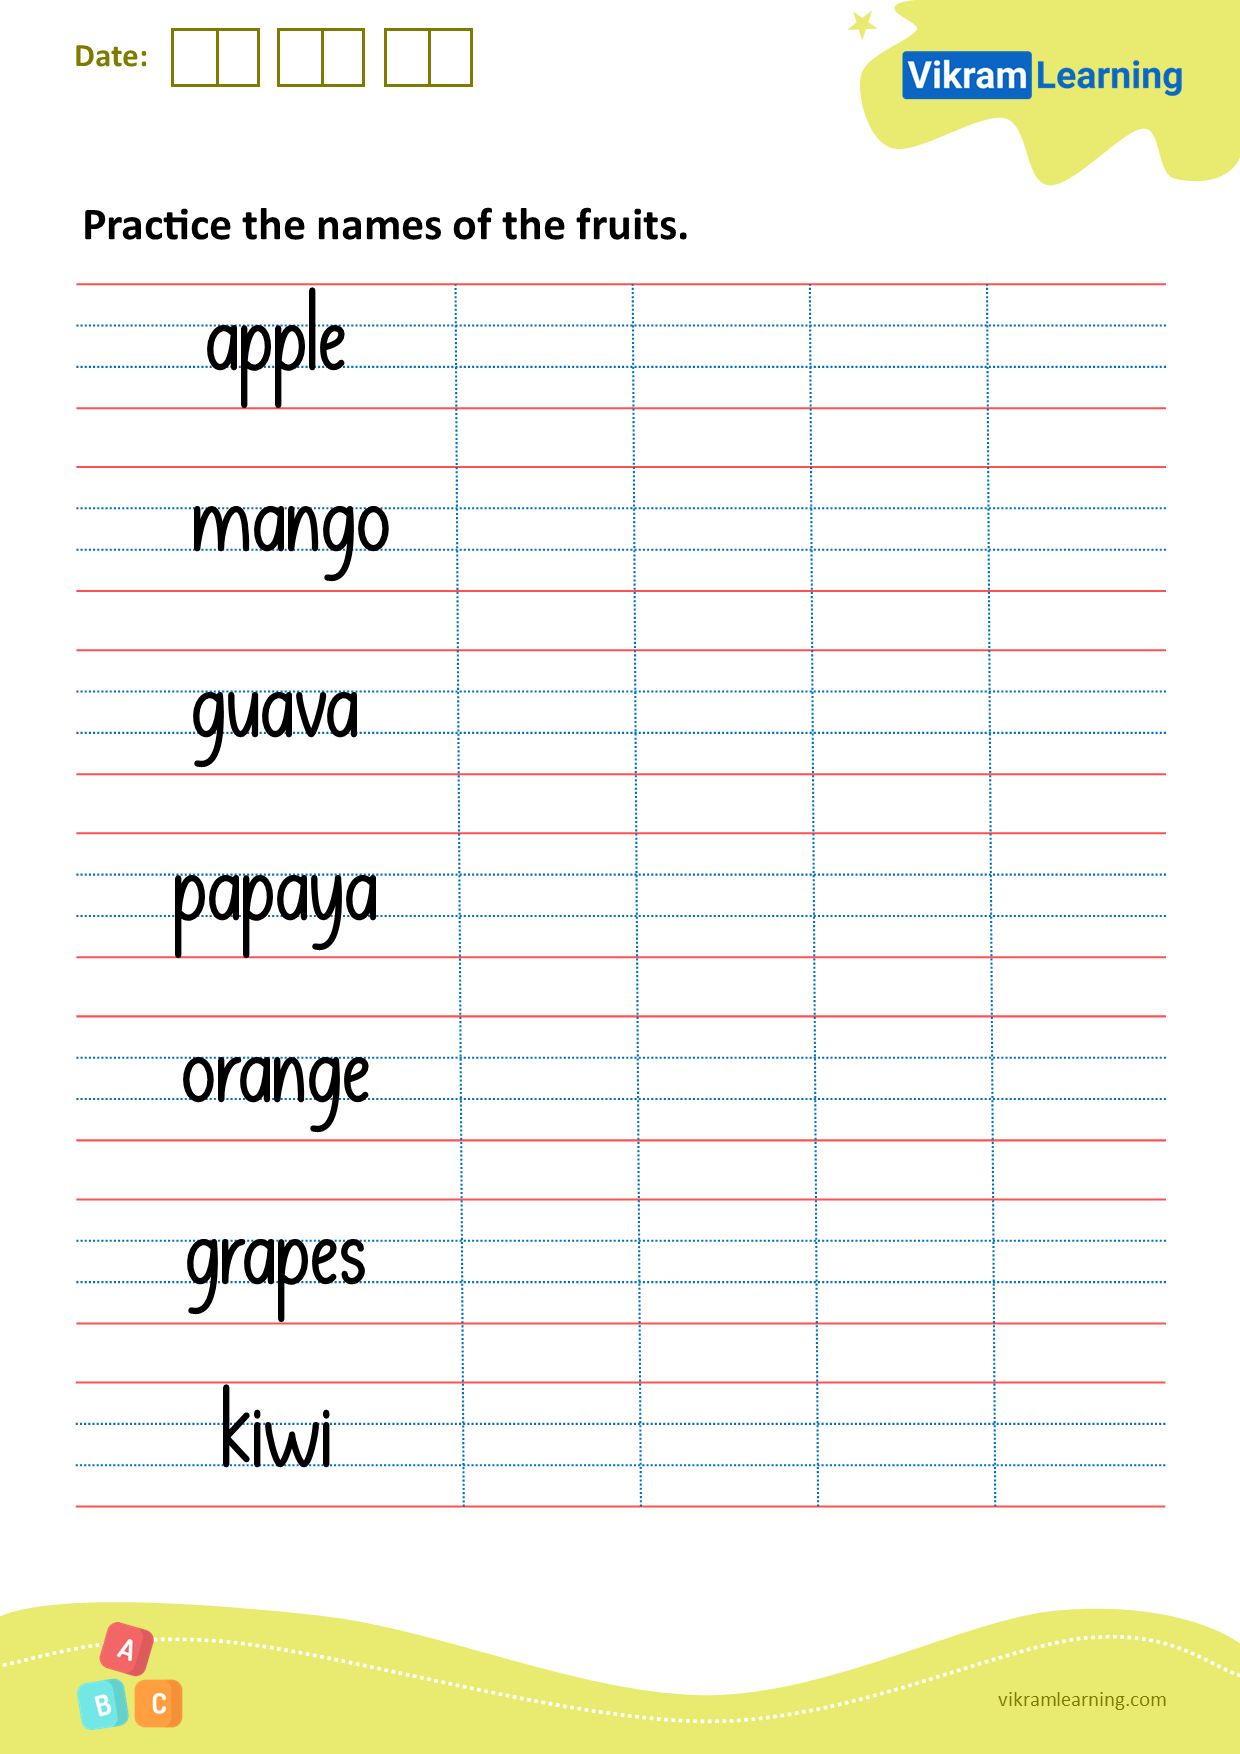 Download practice the names of the fruits worksheets